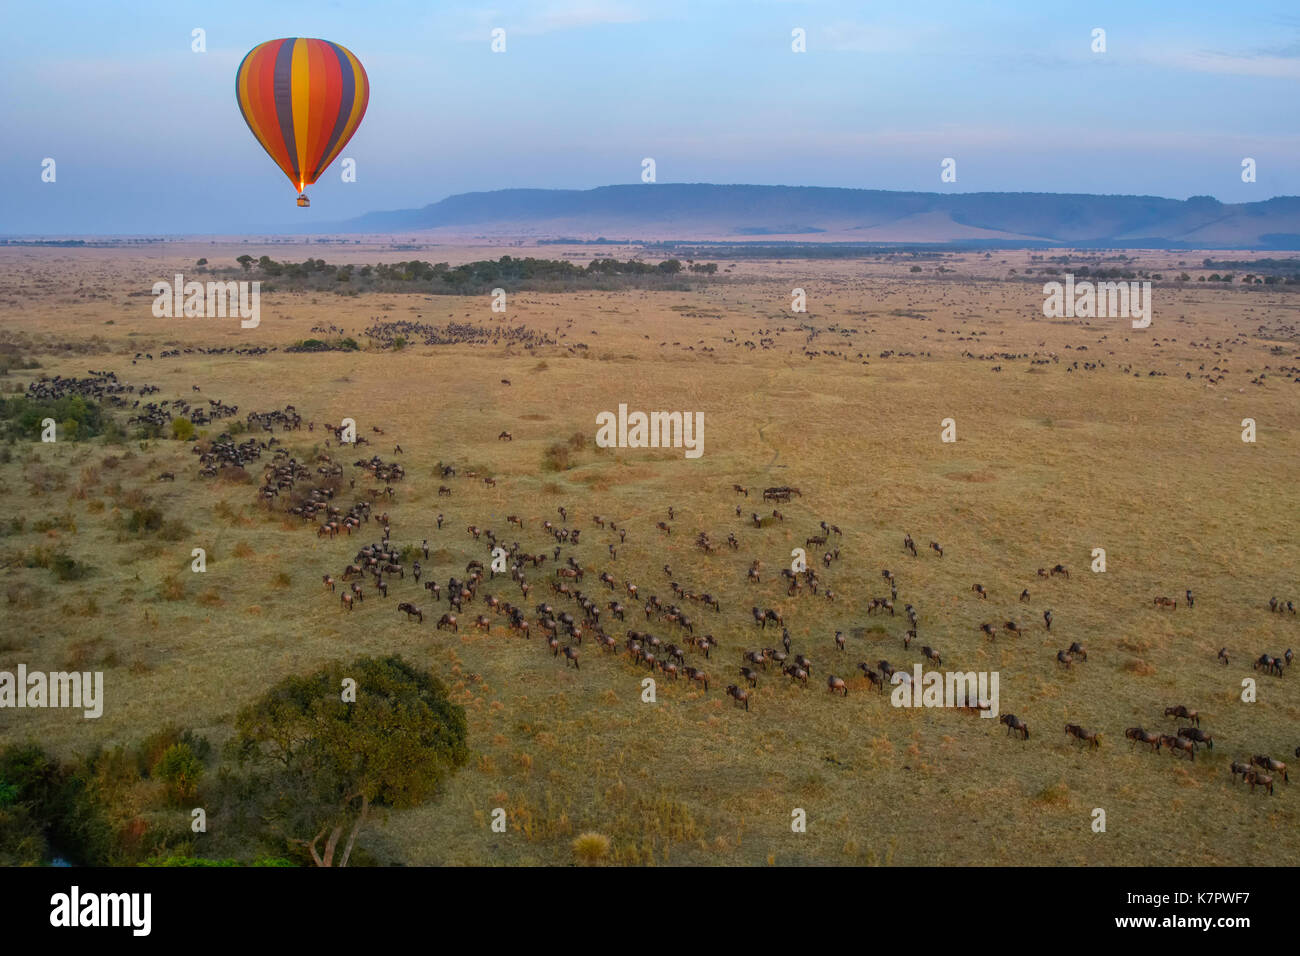 Hot air ballon over the Masai Mara preserve in Kenya during the great migration Stock Photo